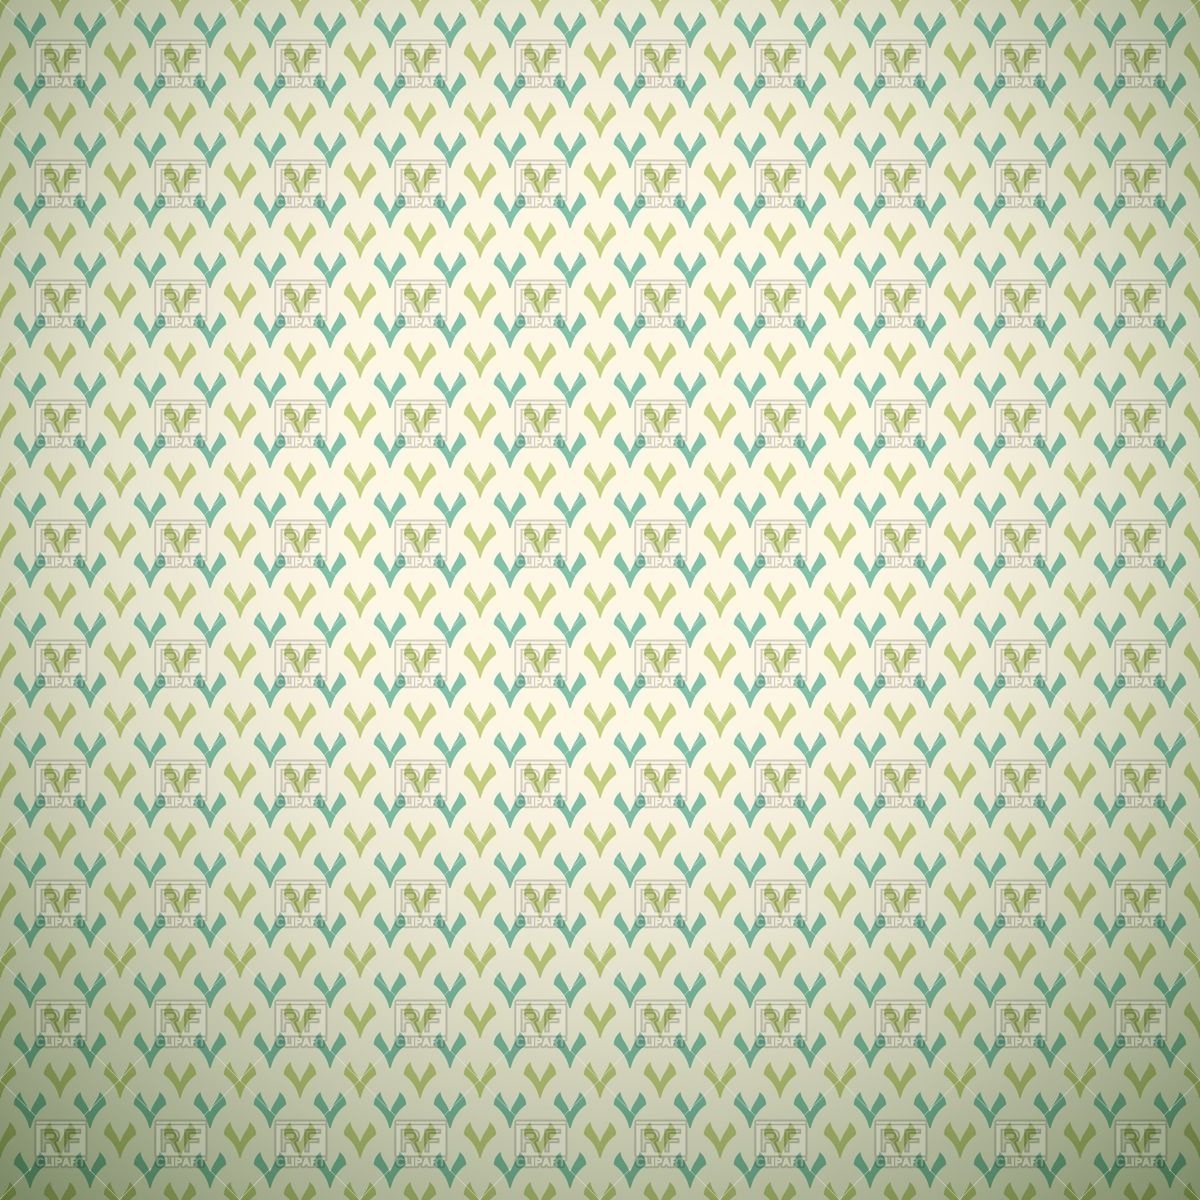     Retro Style Seamless Wallpaper Download Royalty Free Vector Clipart